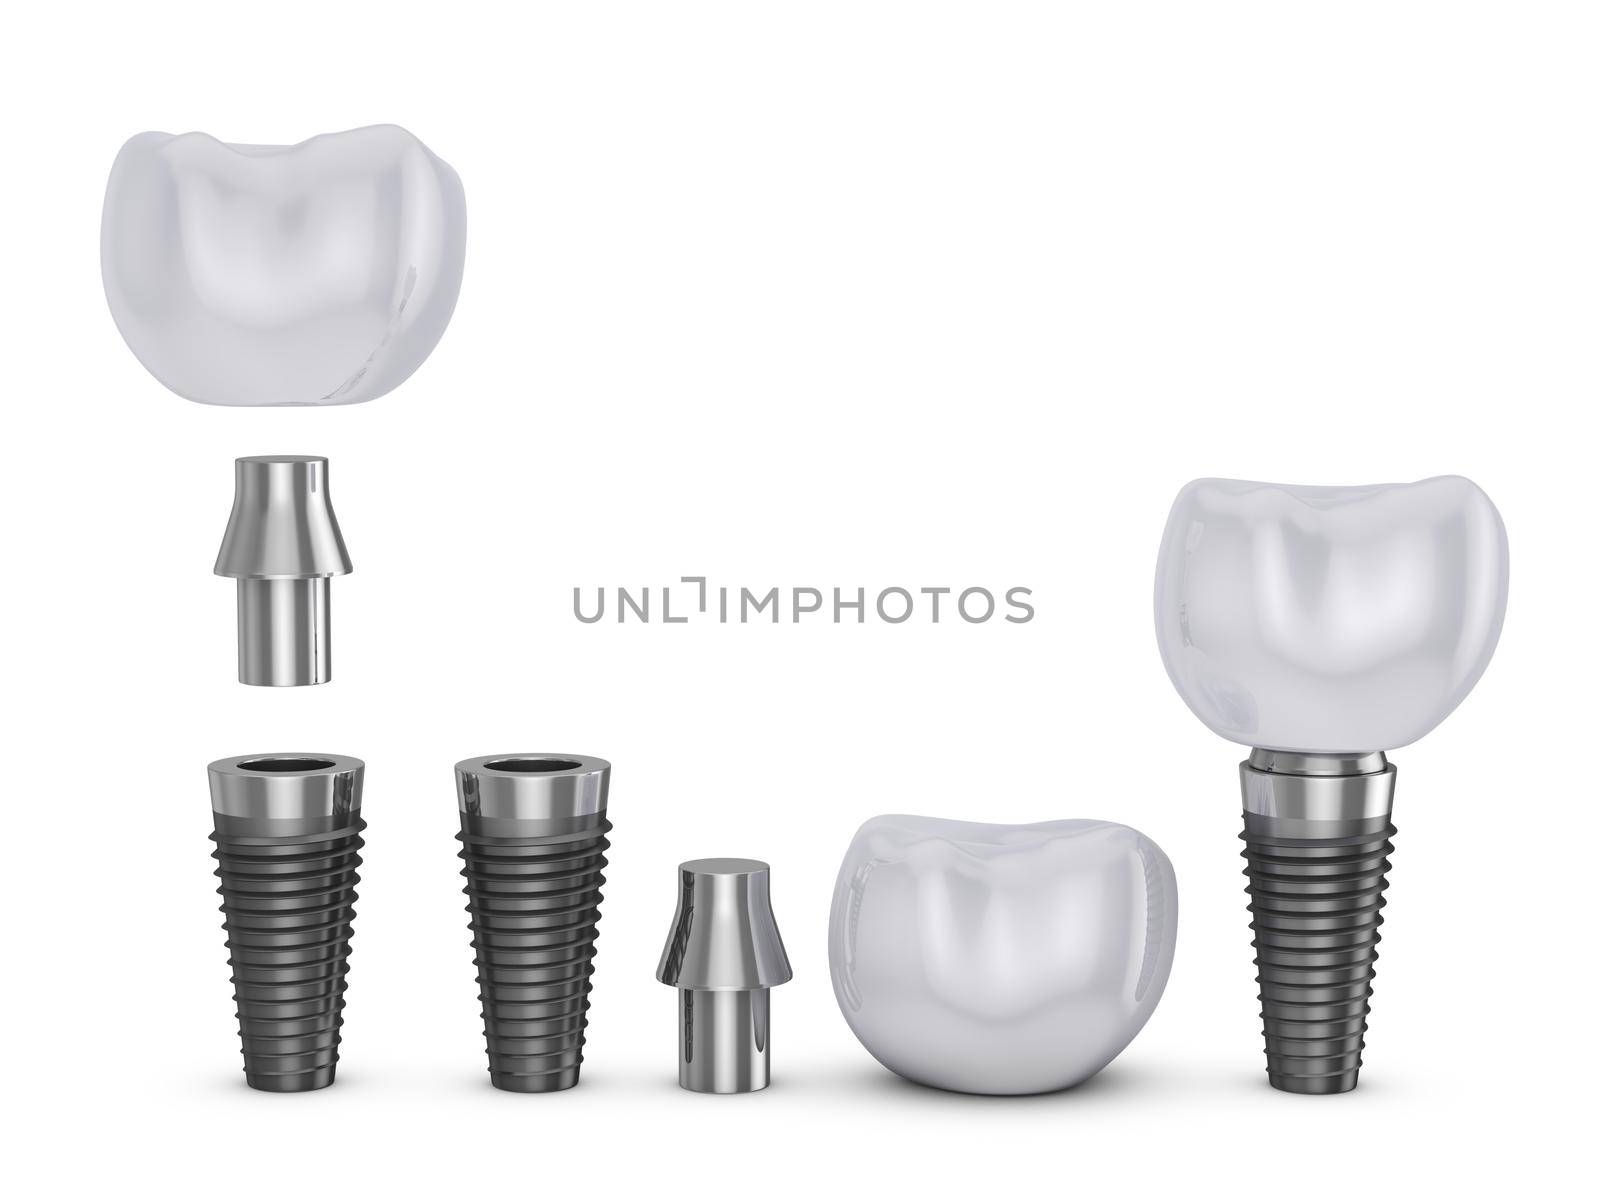 The tooth implant by rommma